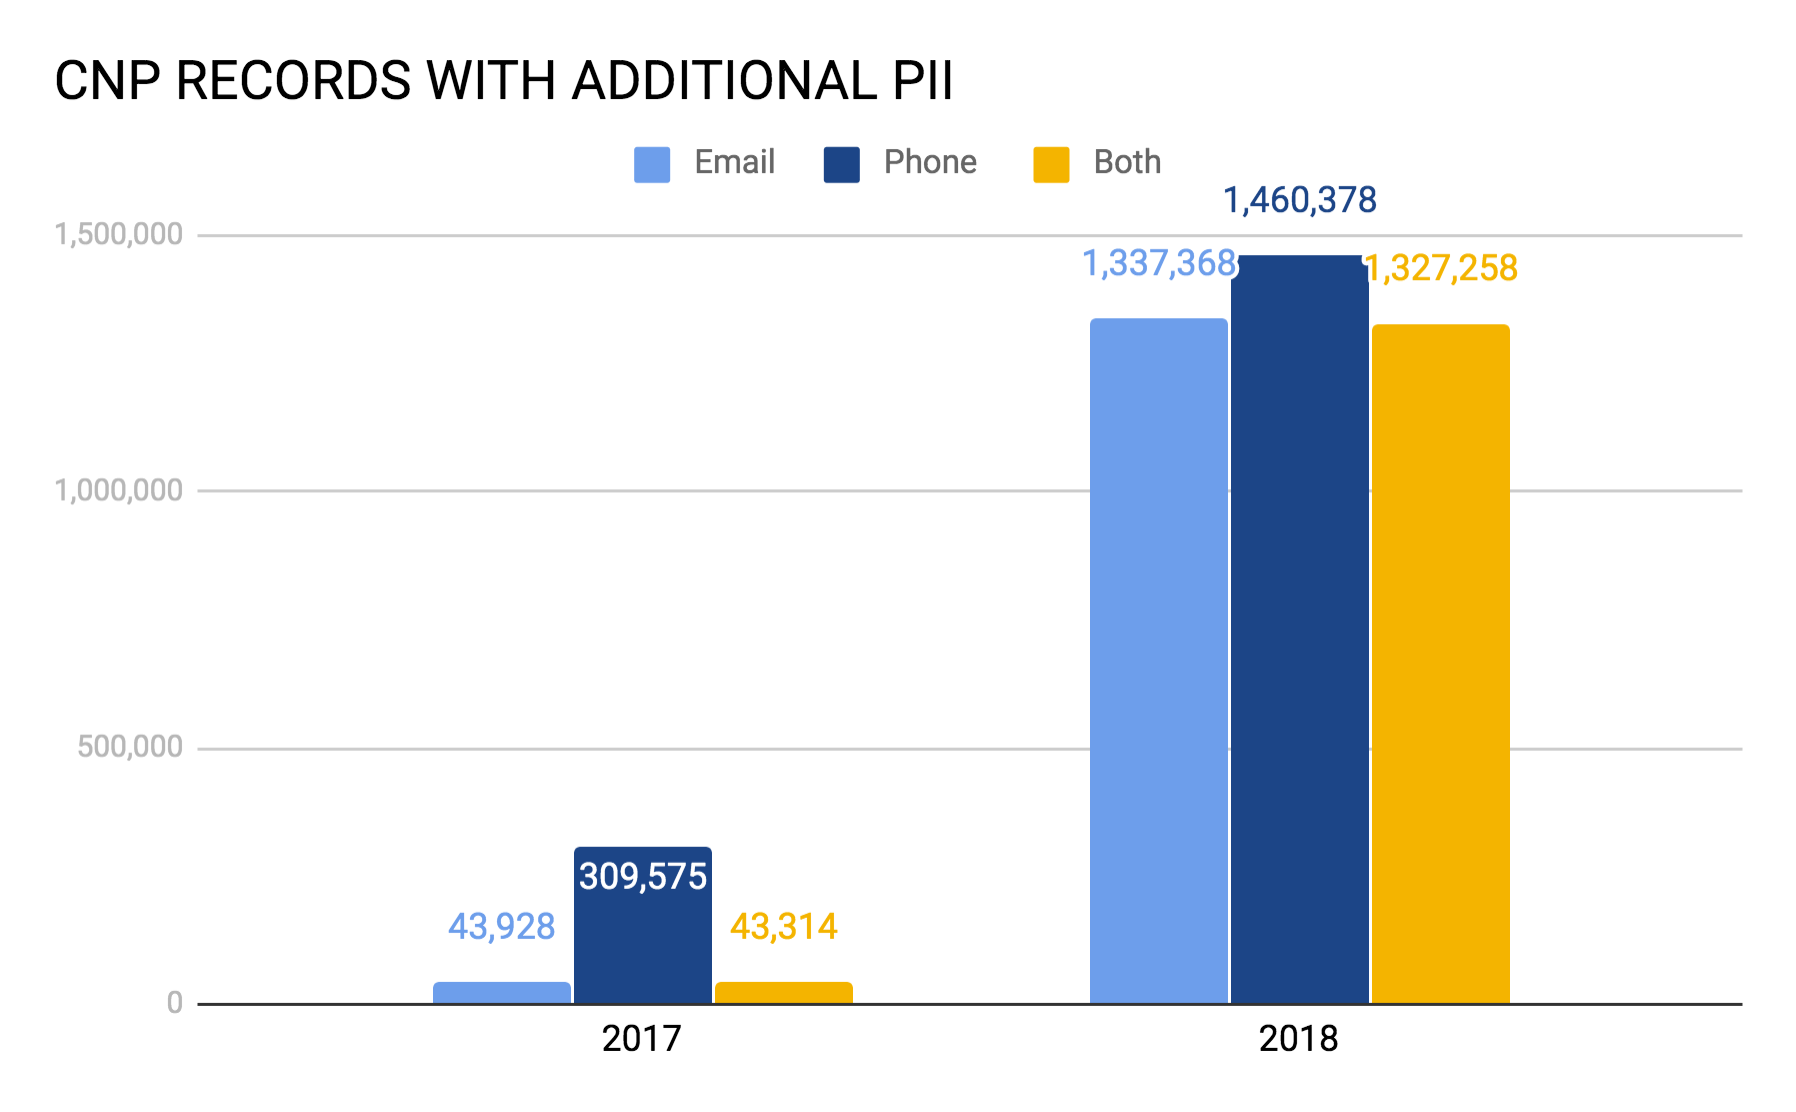 CNP records with additional PII statistics